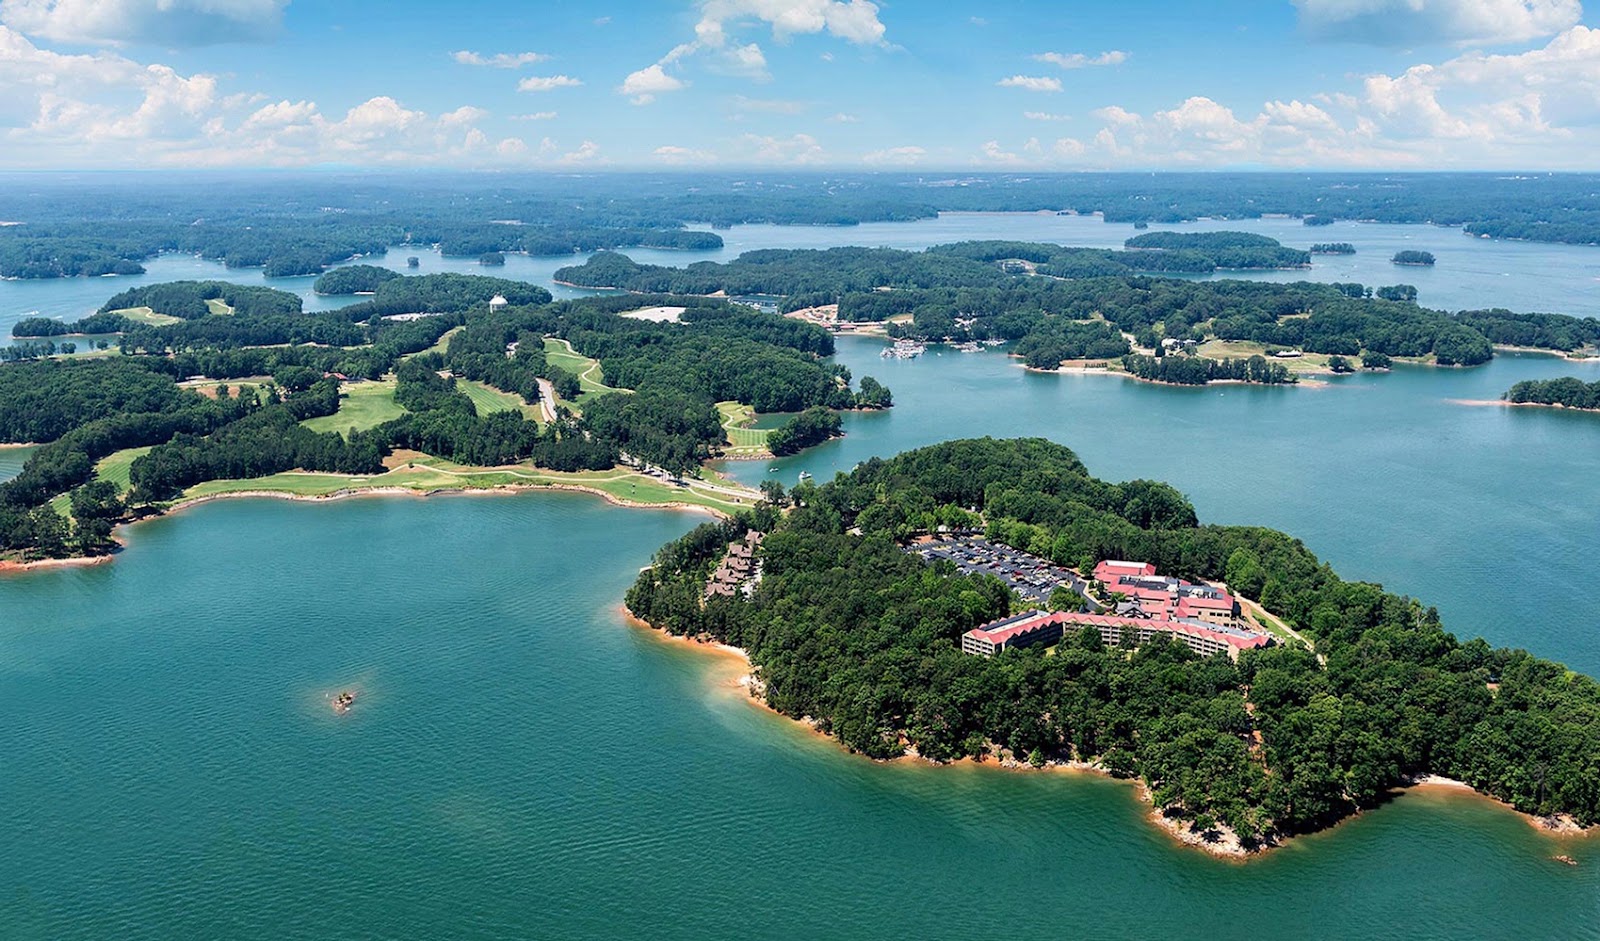 Lake Lanier is one of the most cherished lakes in the country.